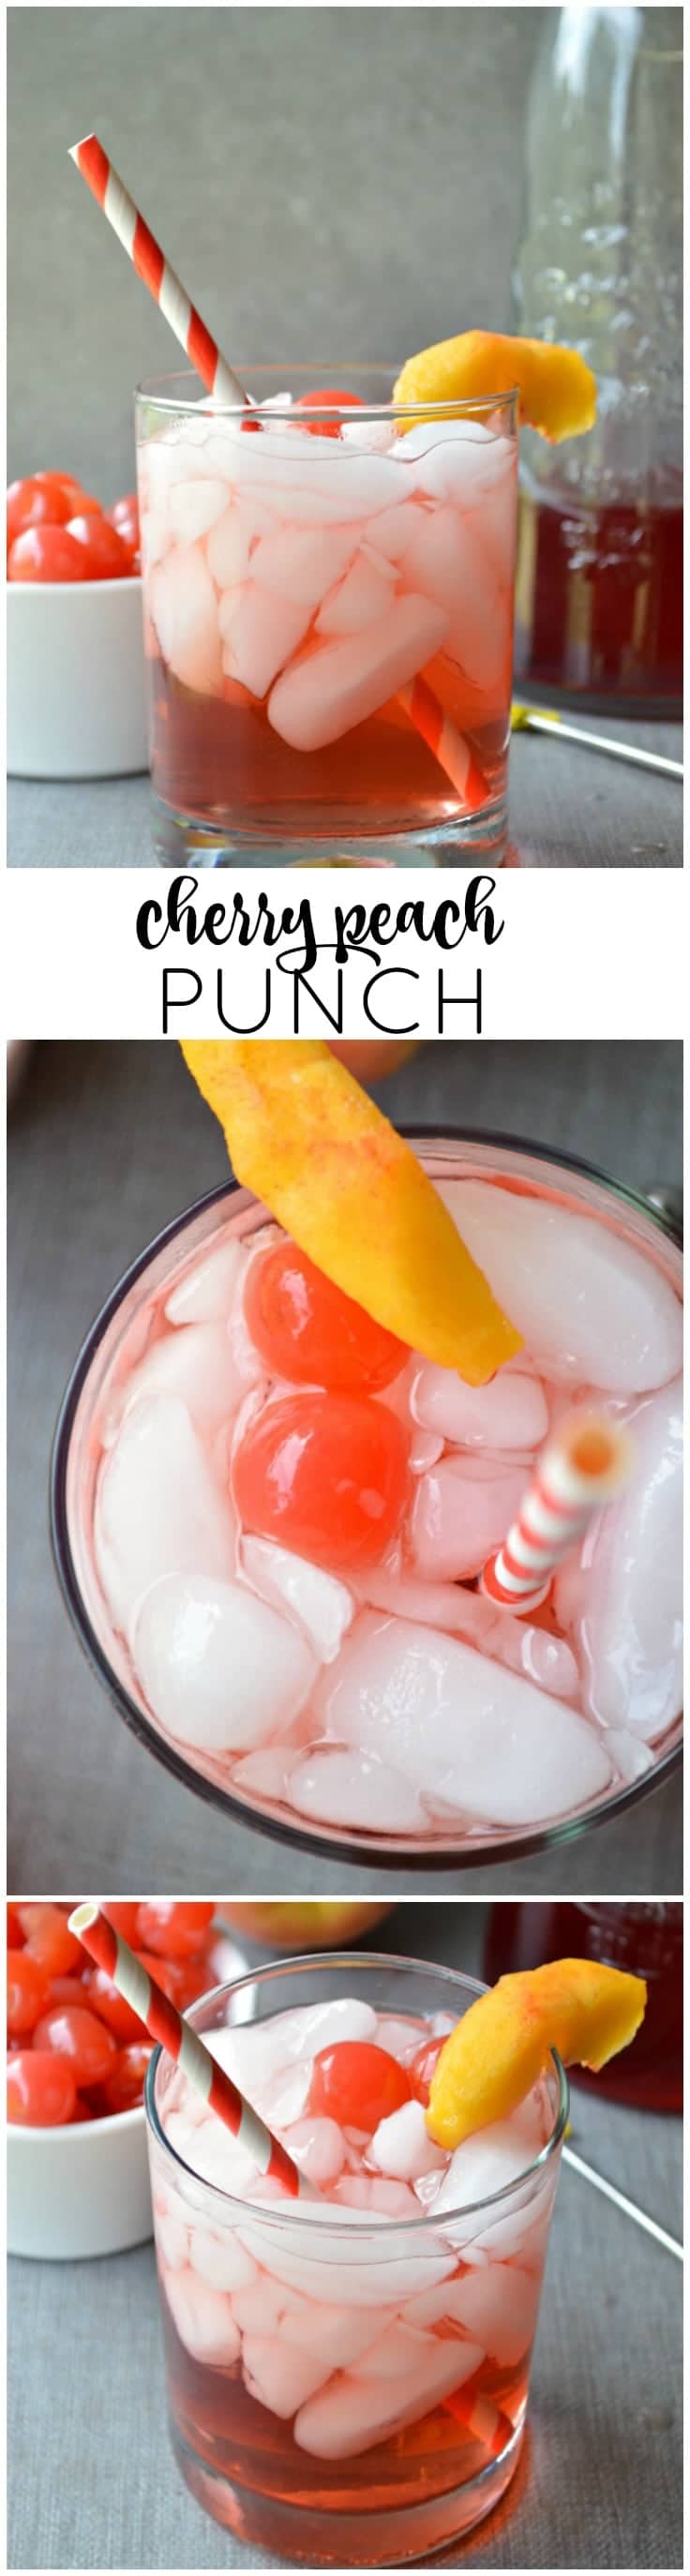 A quick, refreshing cocktail made with whipped cream vodka and peach cider! Cherry Peach Punch is perfect for all your end of summer party needs!